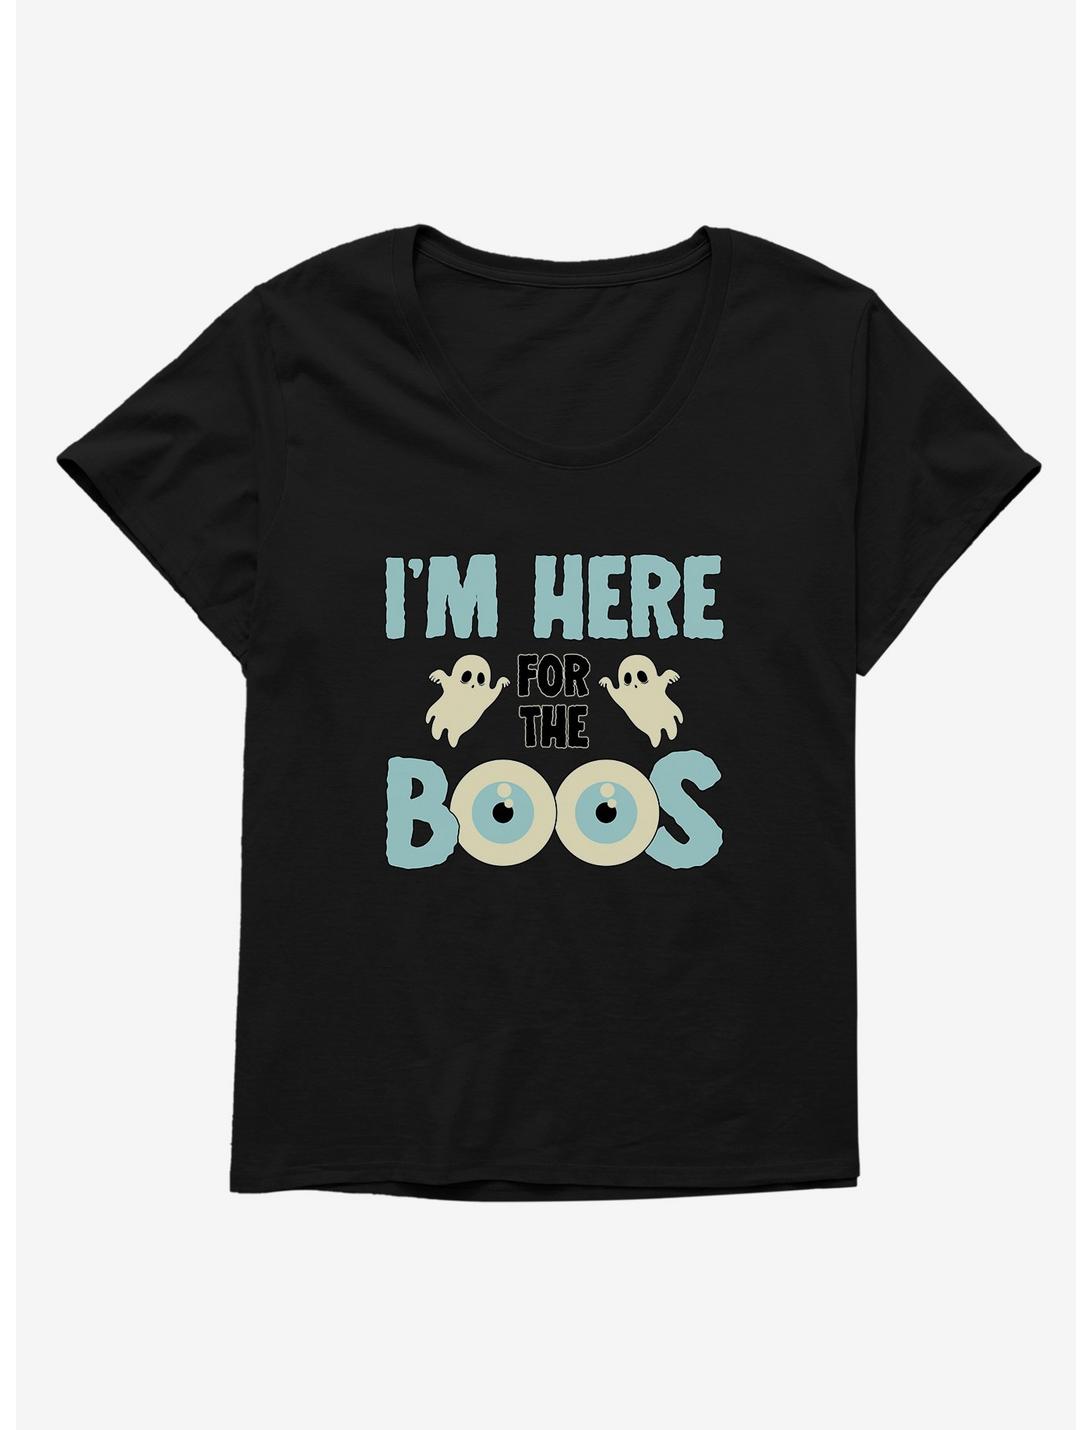 Halloween Here For The Boos Girls Plus Size T-Shirt, BLACK, hi-res